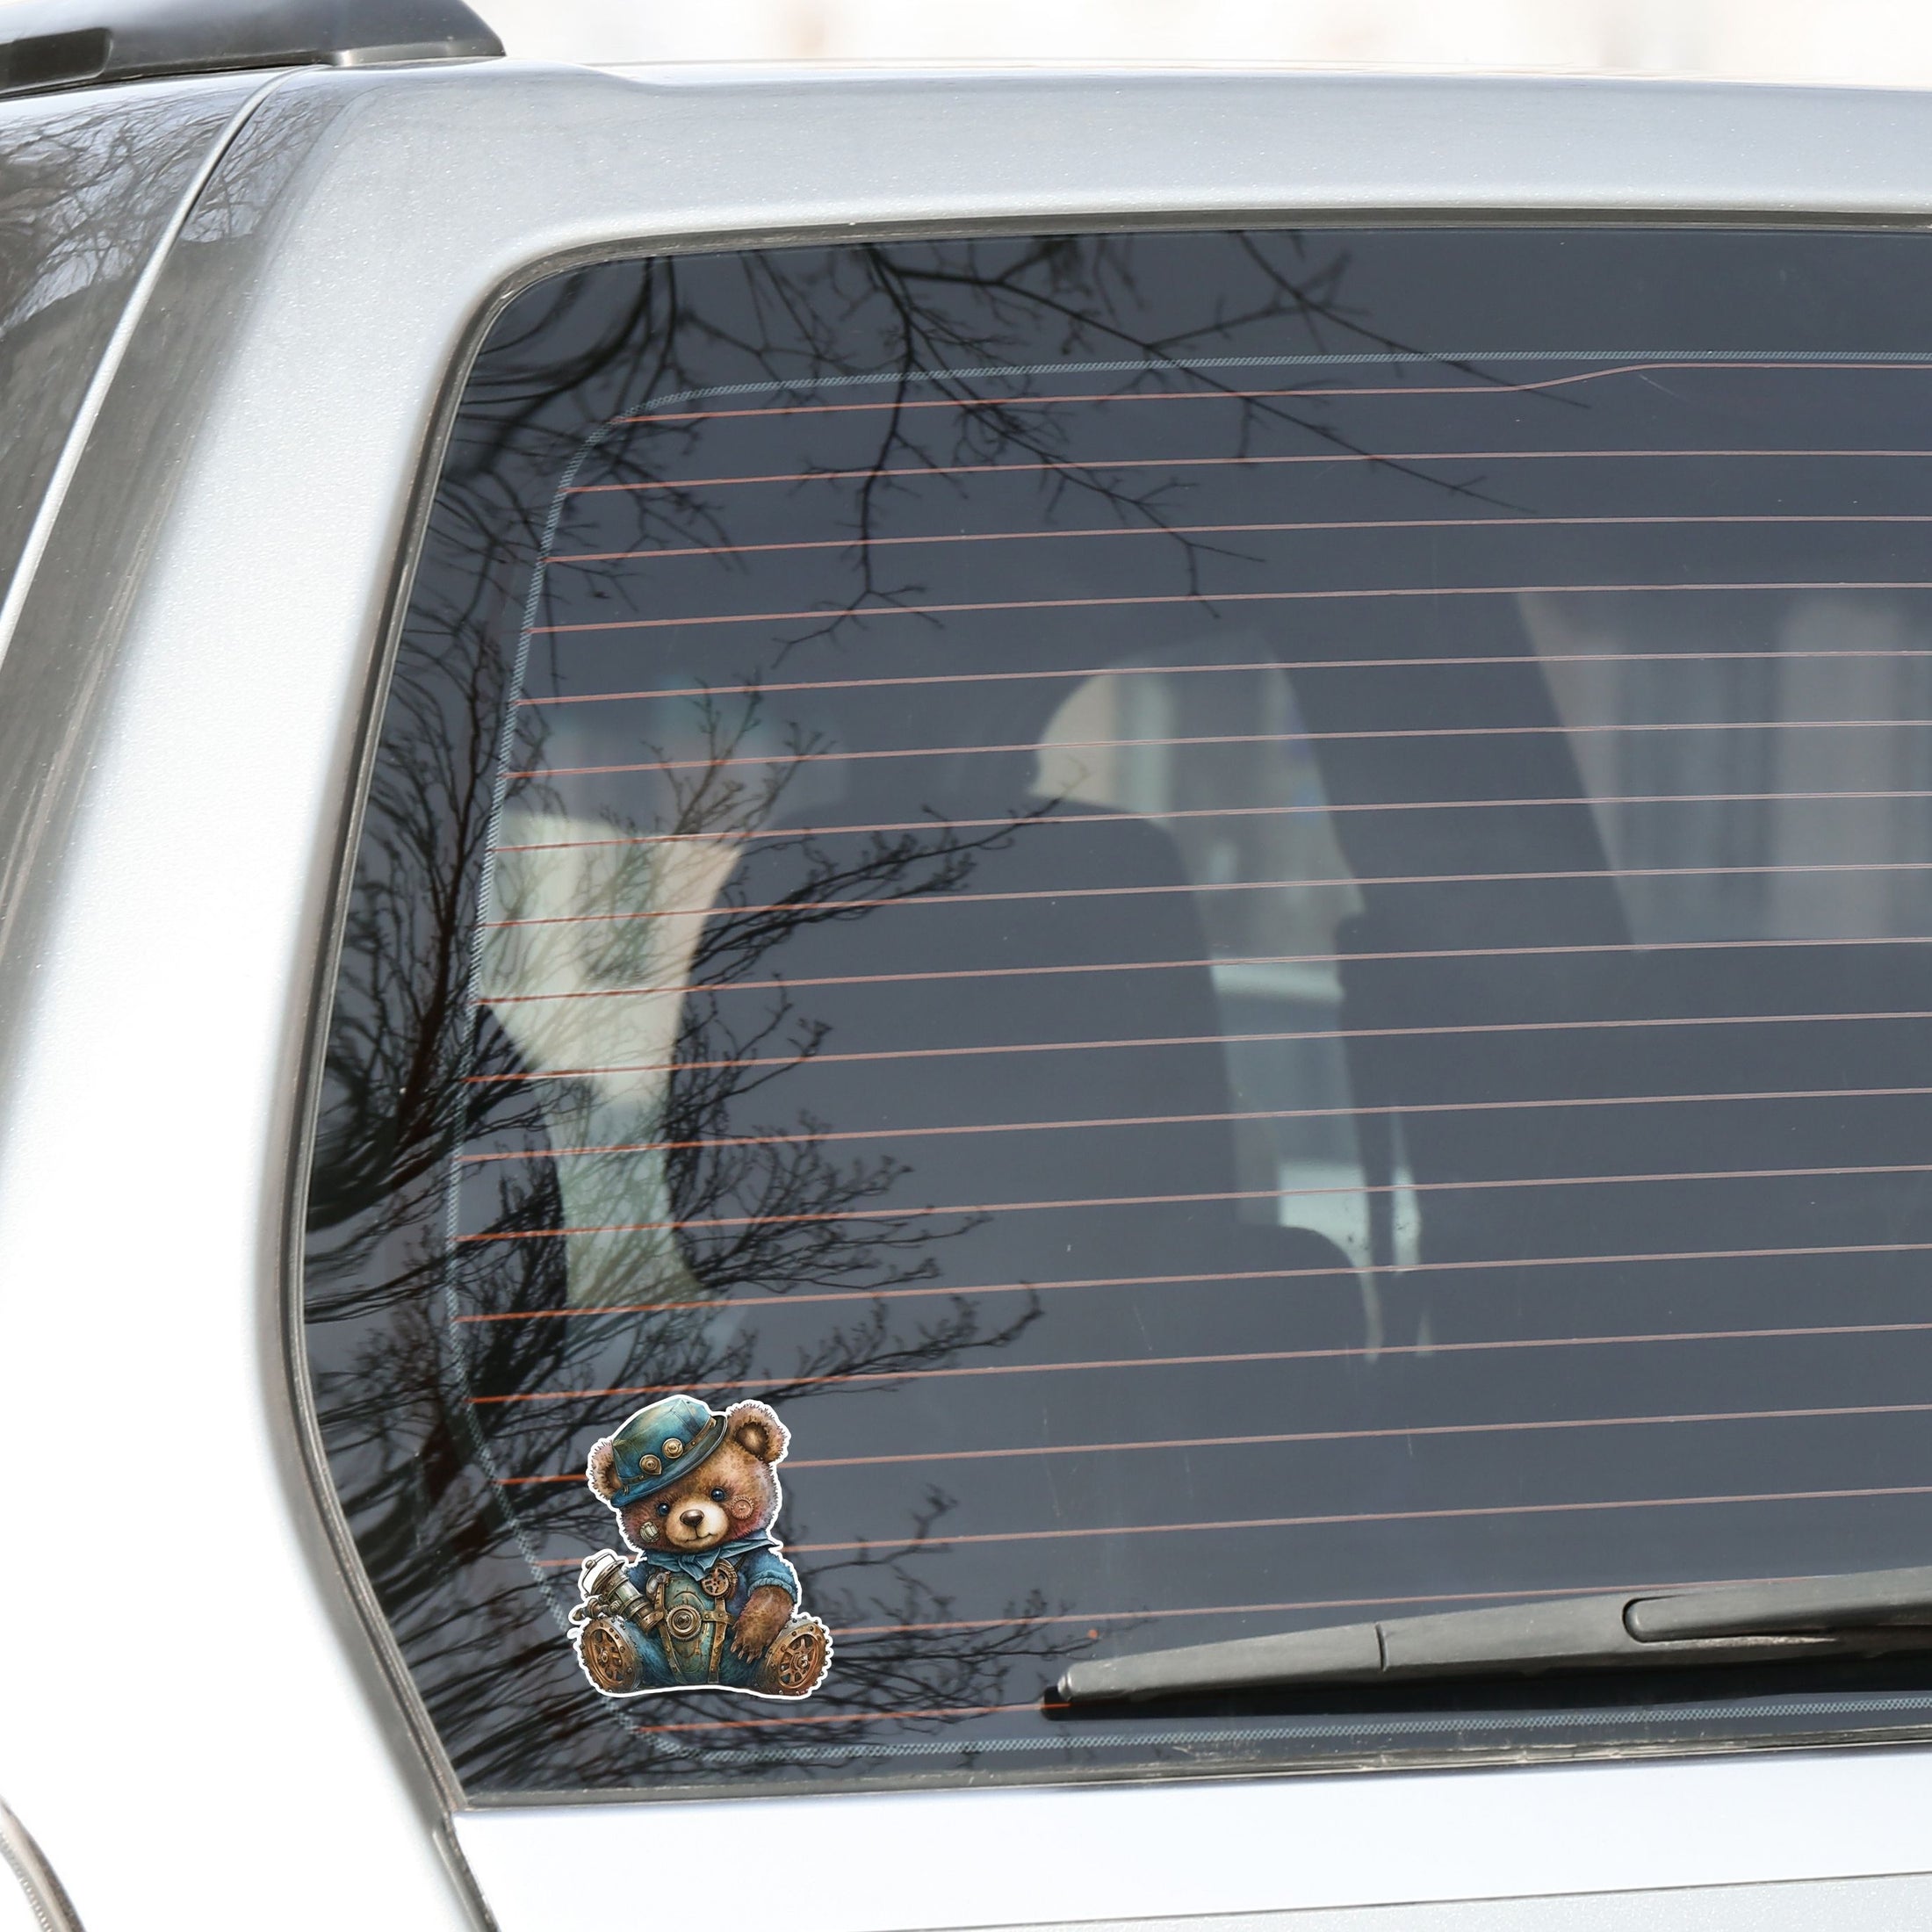 This image shows the steampunk teddy sticker on the back window of a car.